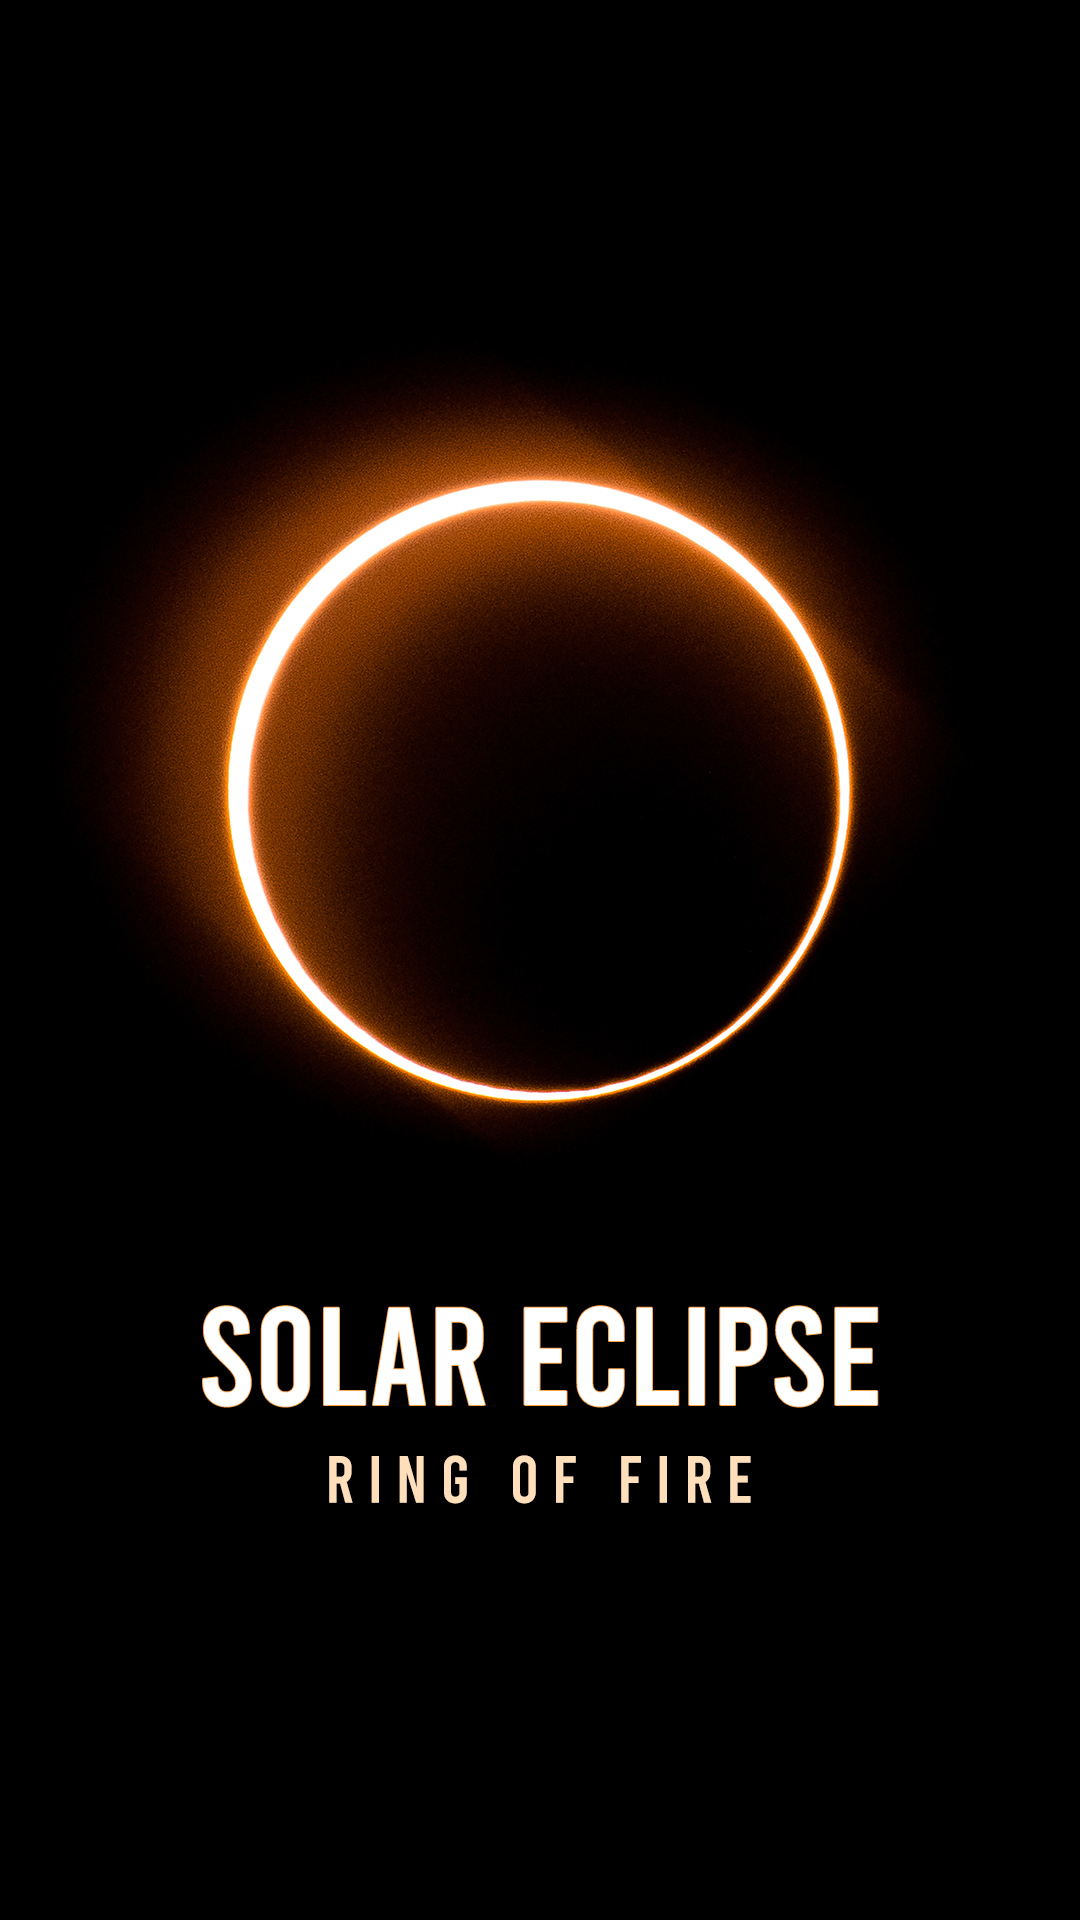 6+ Solar Eclipse 4K Wallpapers: HD, 4K, 5K for PC and Mobile | Download  free images for iPhone, Android